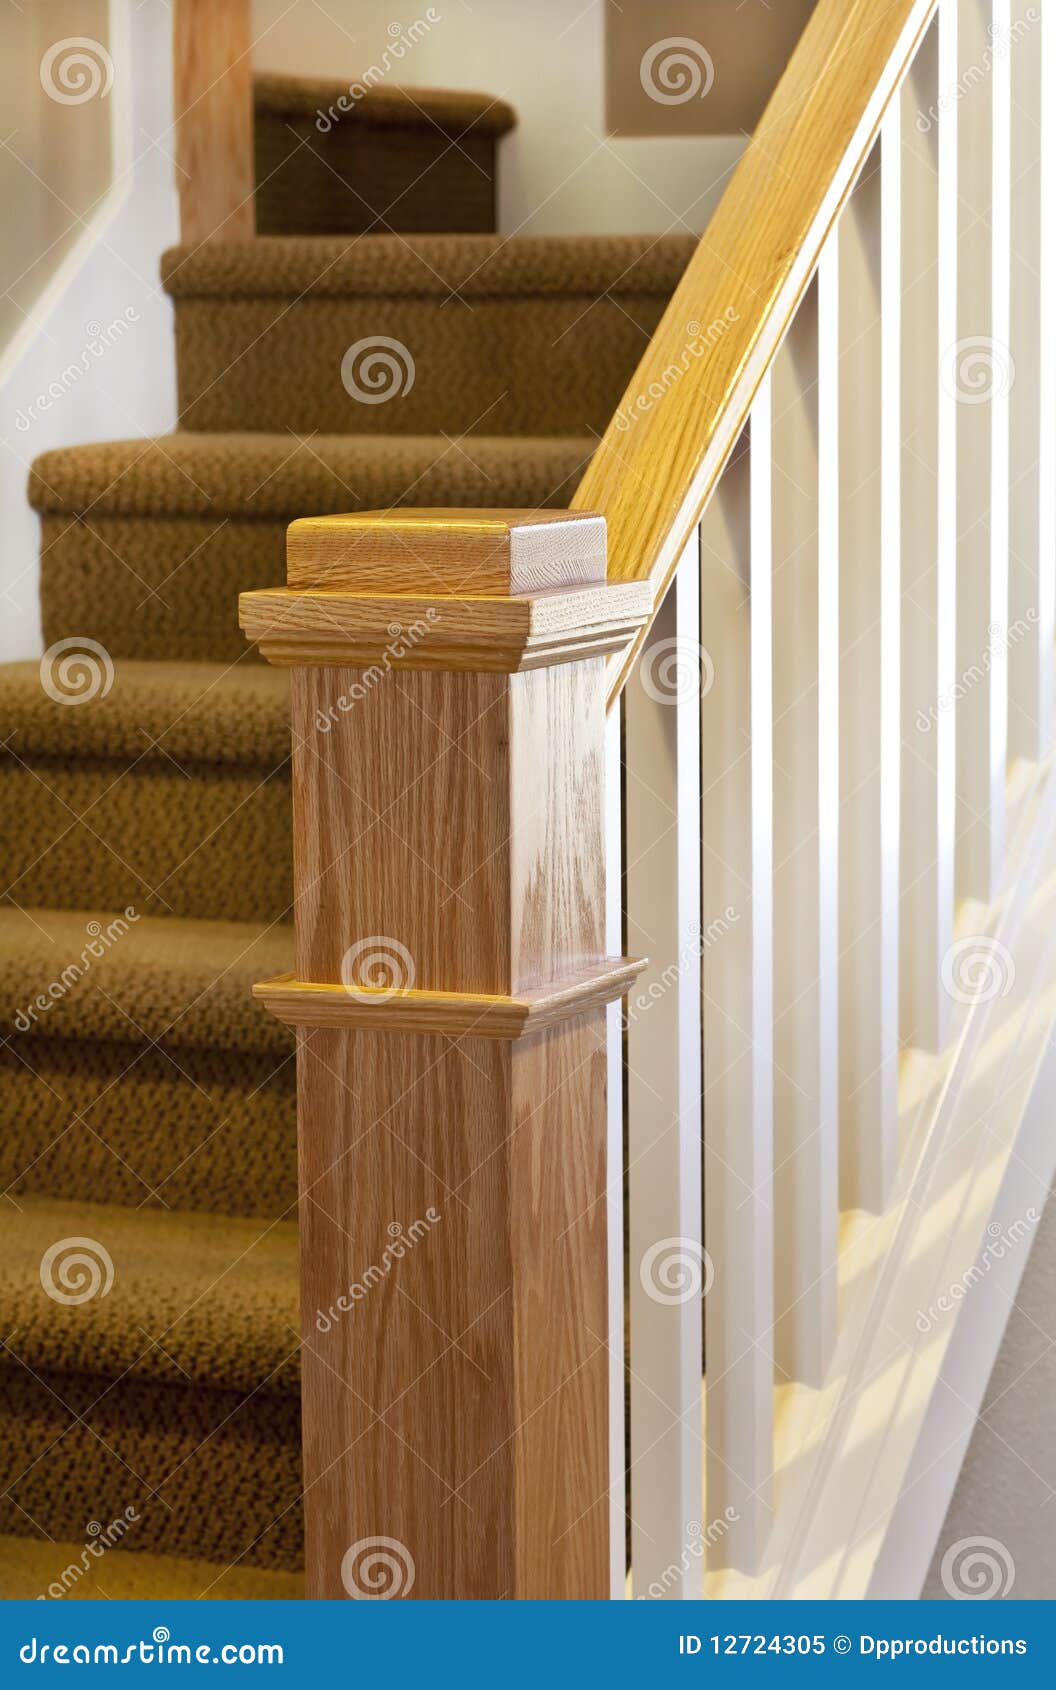 staircase bannister